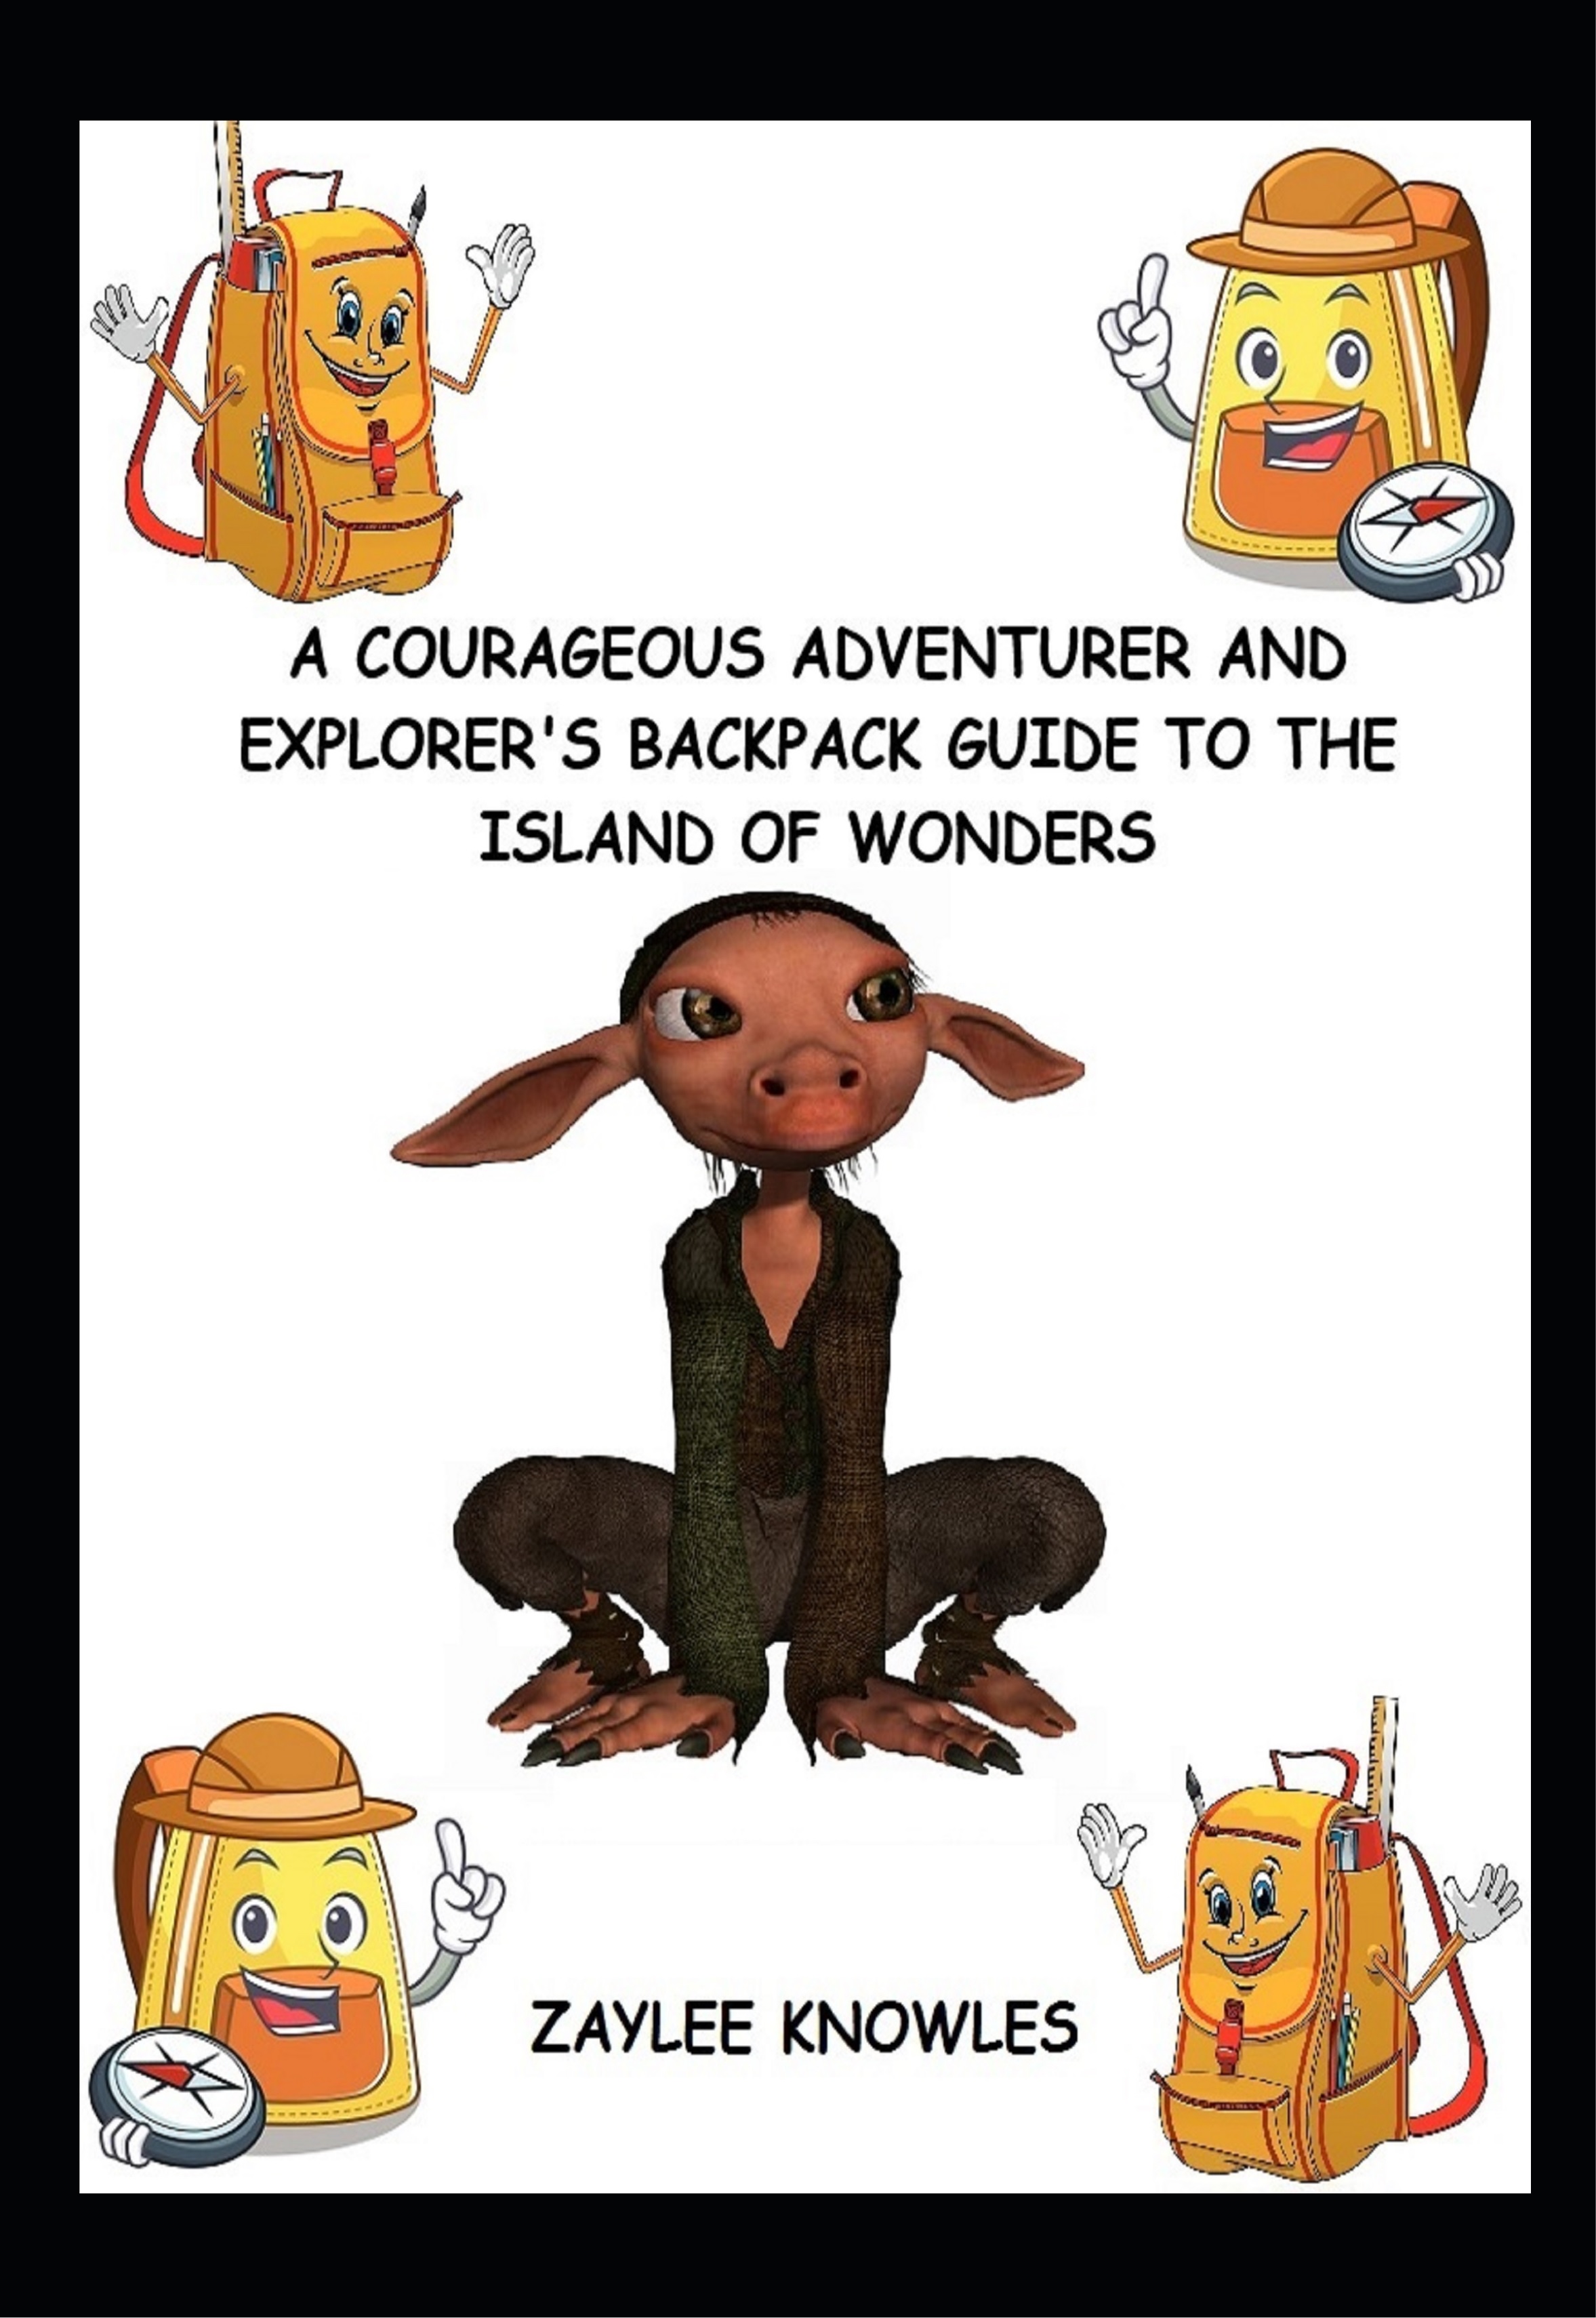 Island of Wonders: A Courageous Adventurer and Explorer's Backpack Guide to the Island of Wonders